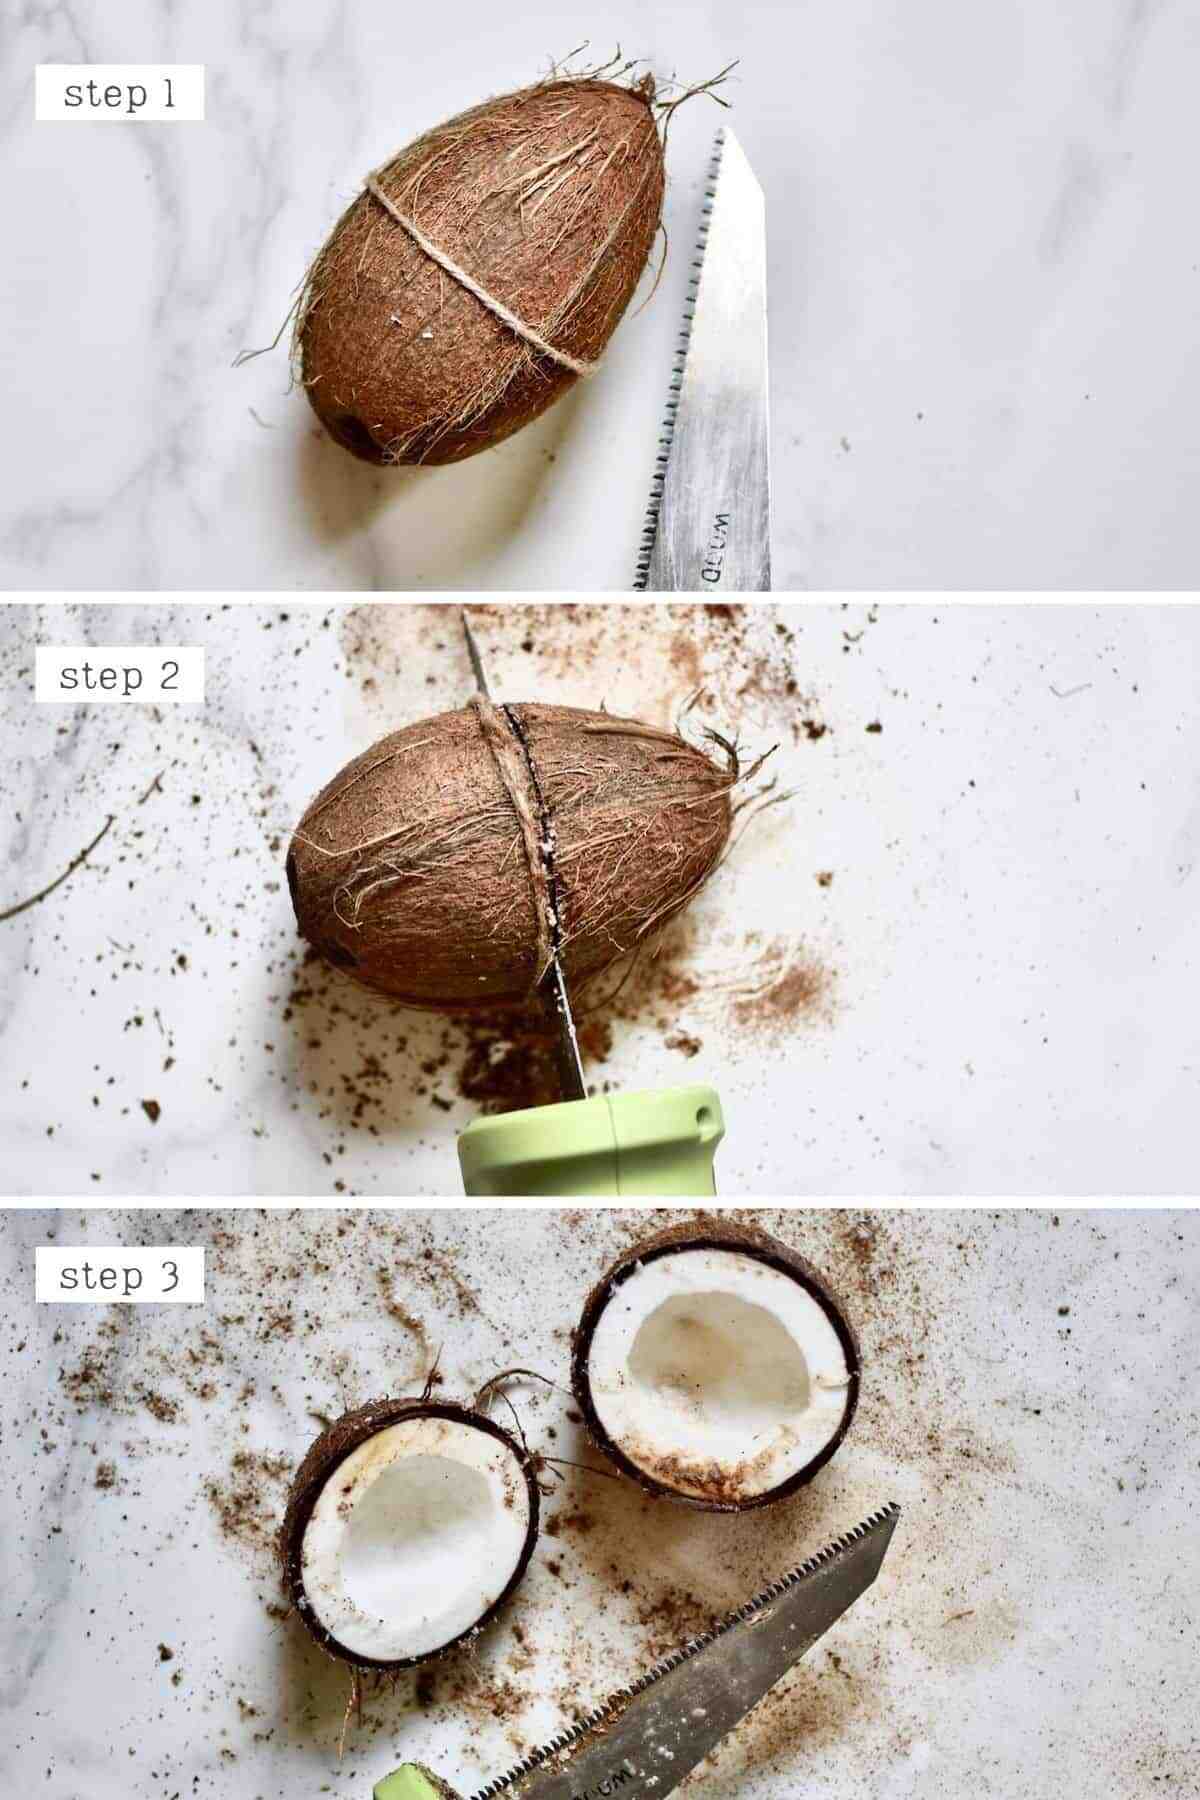 How do you open a coconut step by step?